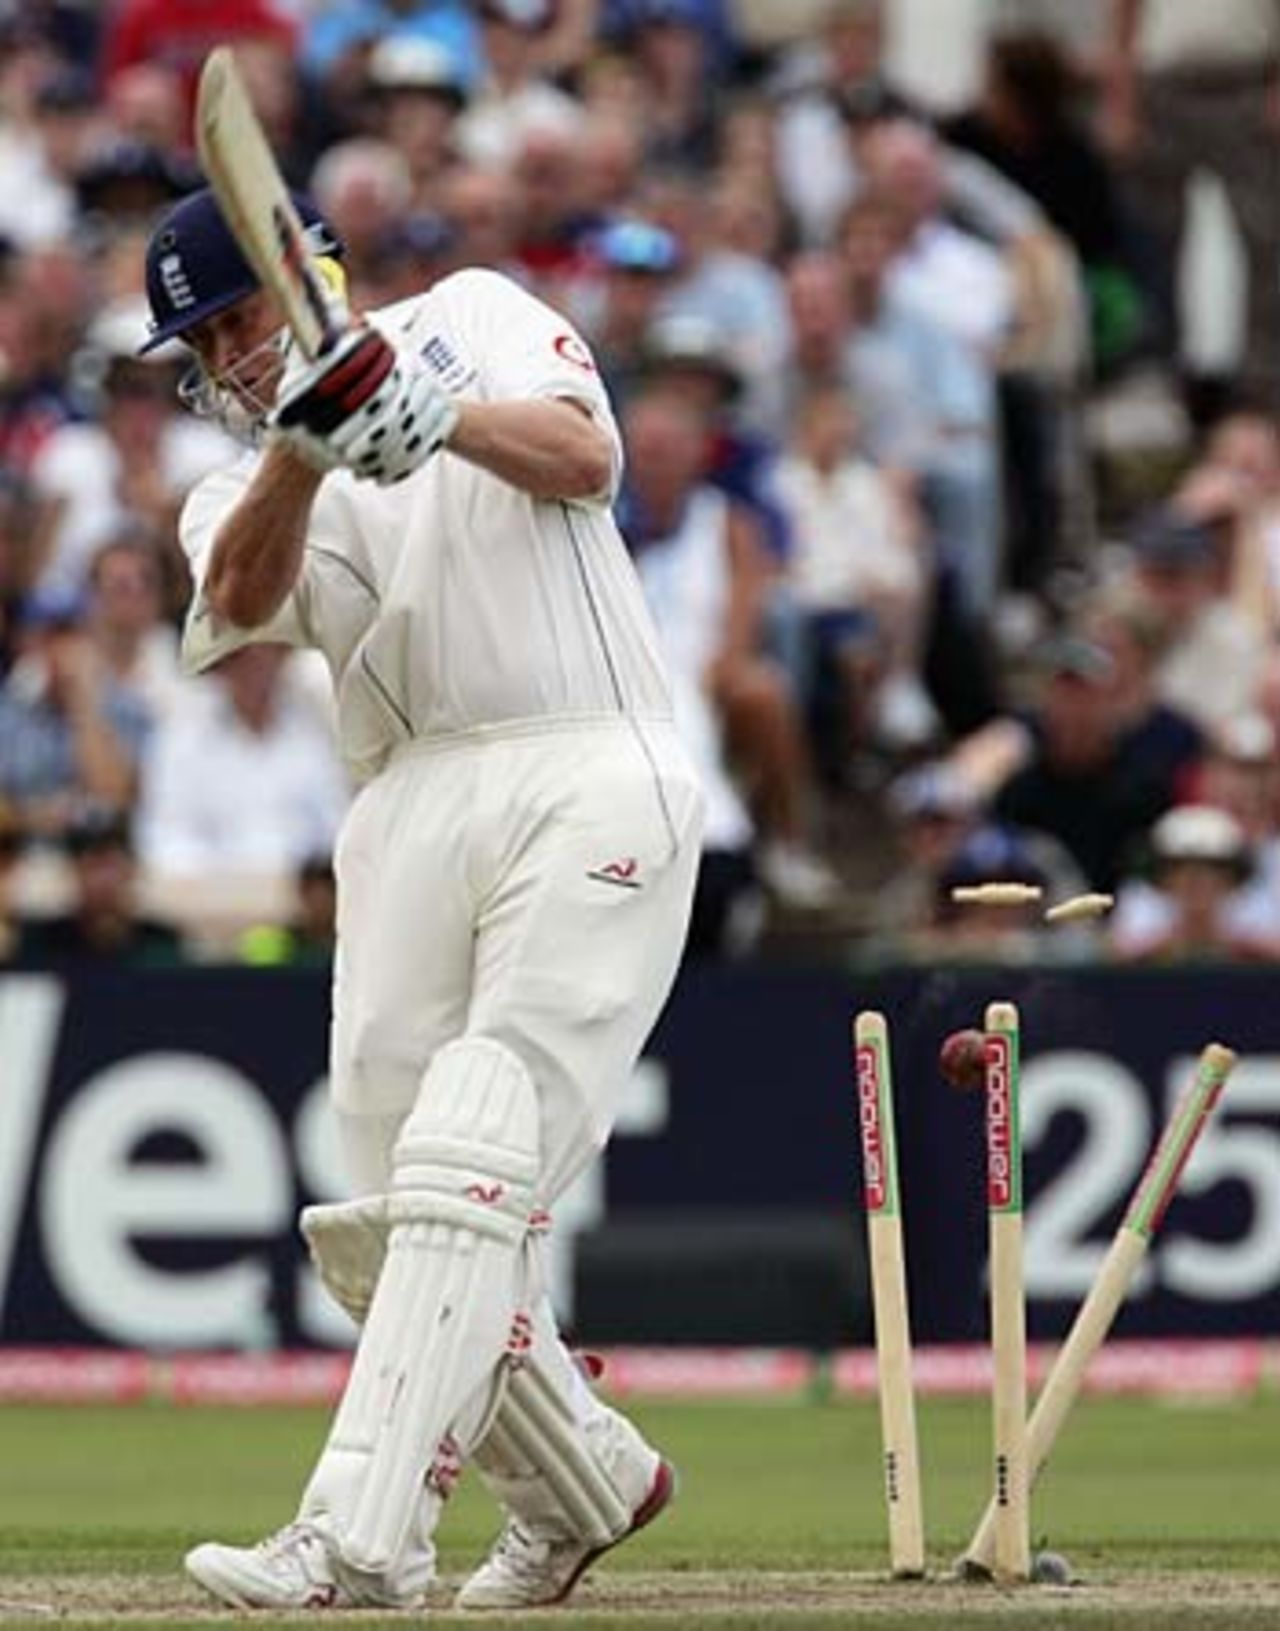 Andrew Flintoff is bowled for 5 by Glenn McGrath during England;s chase for quick runs, England v Australia, 3rd Test, Old Trafford, August 14, 2005